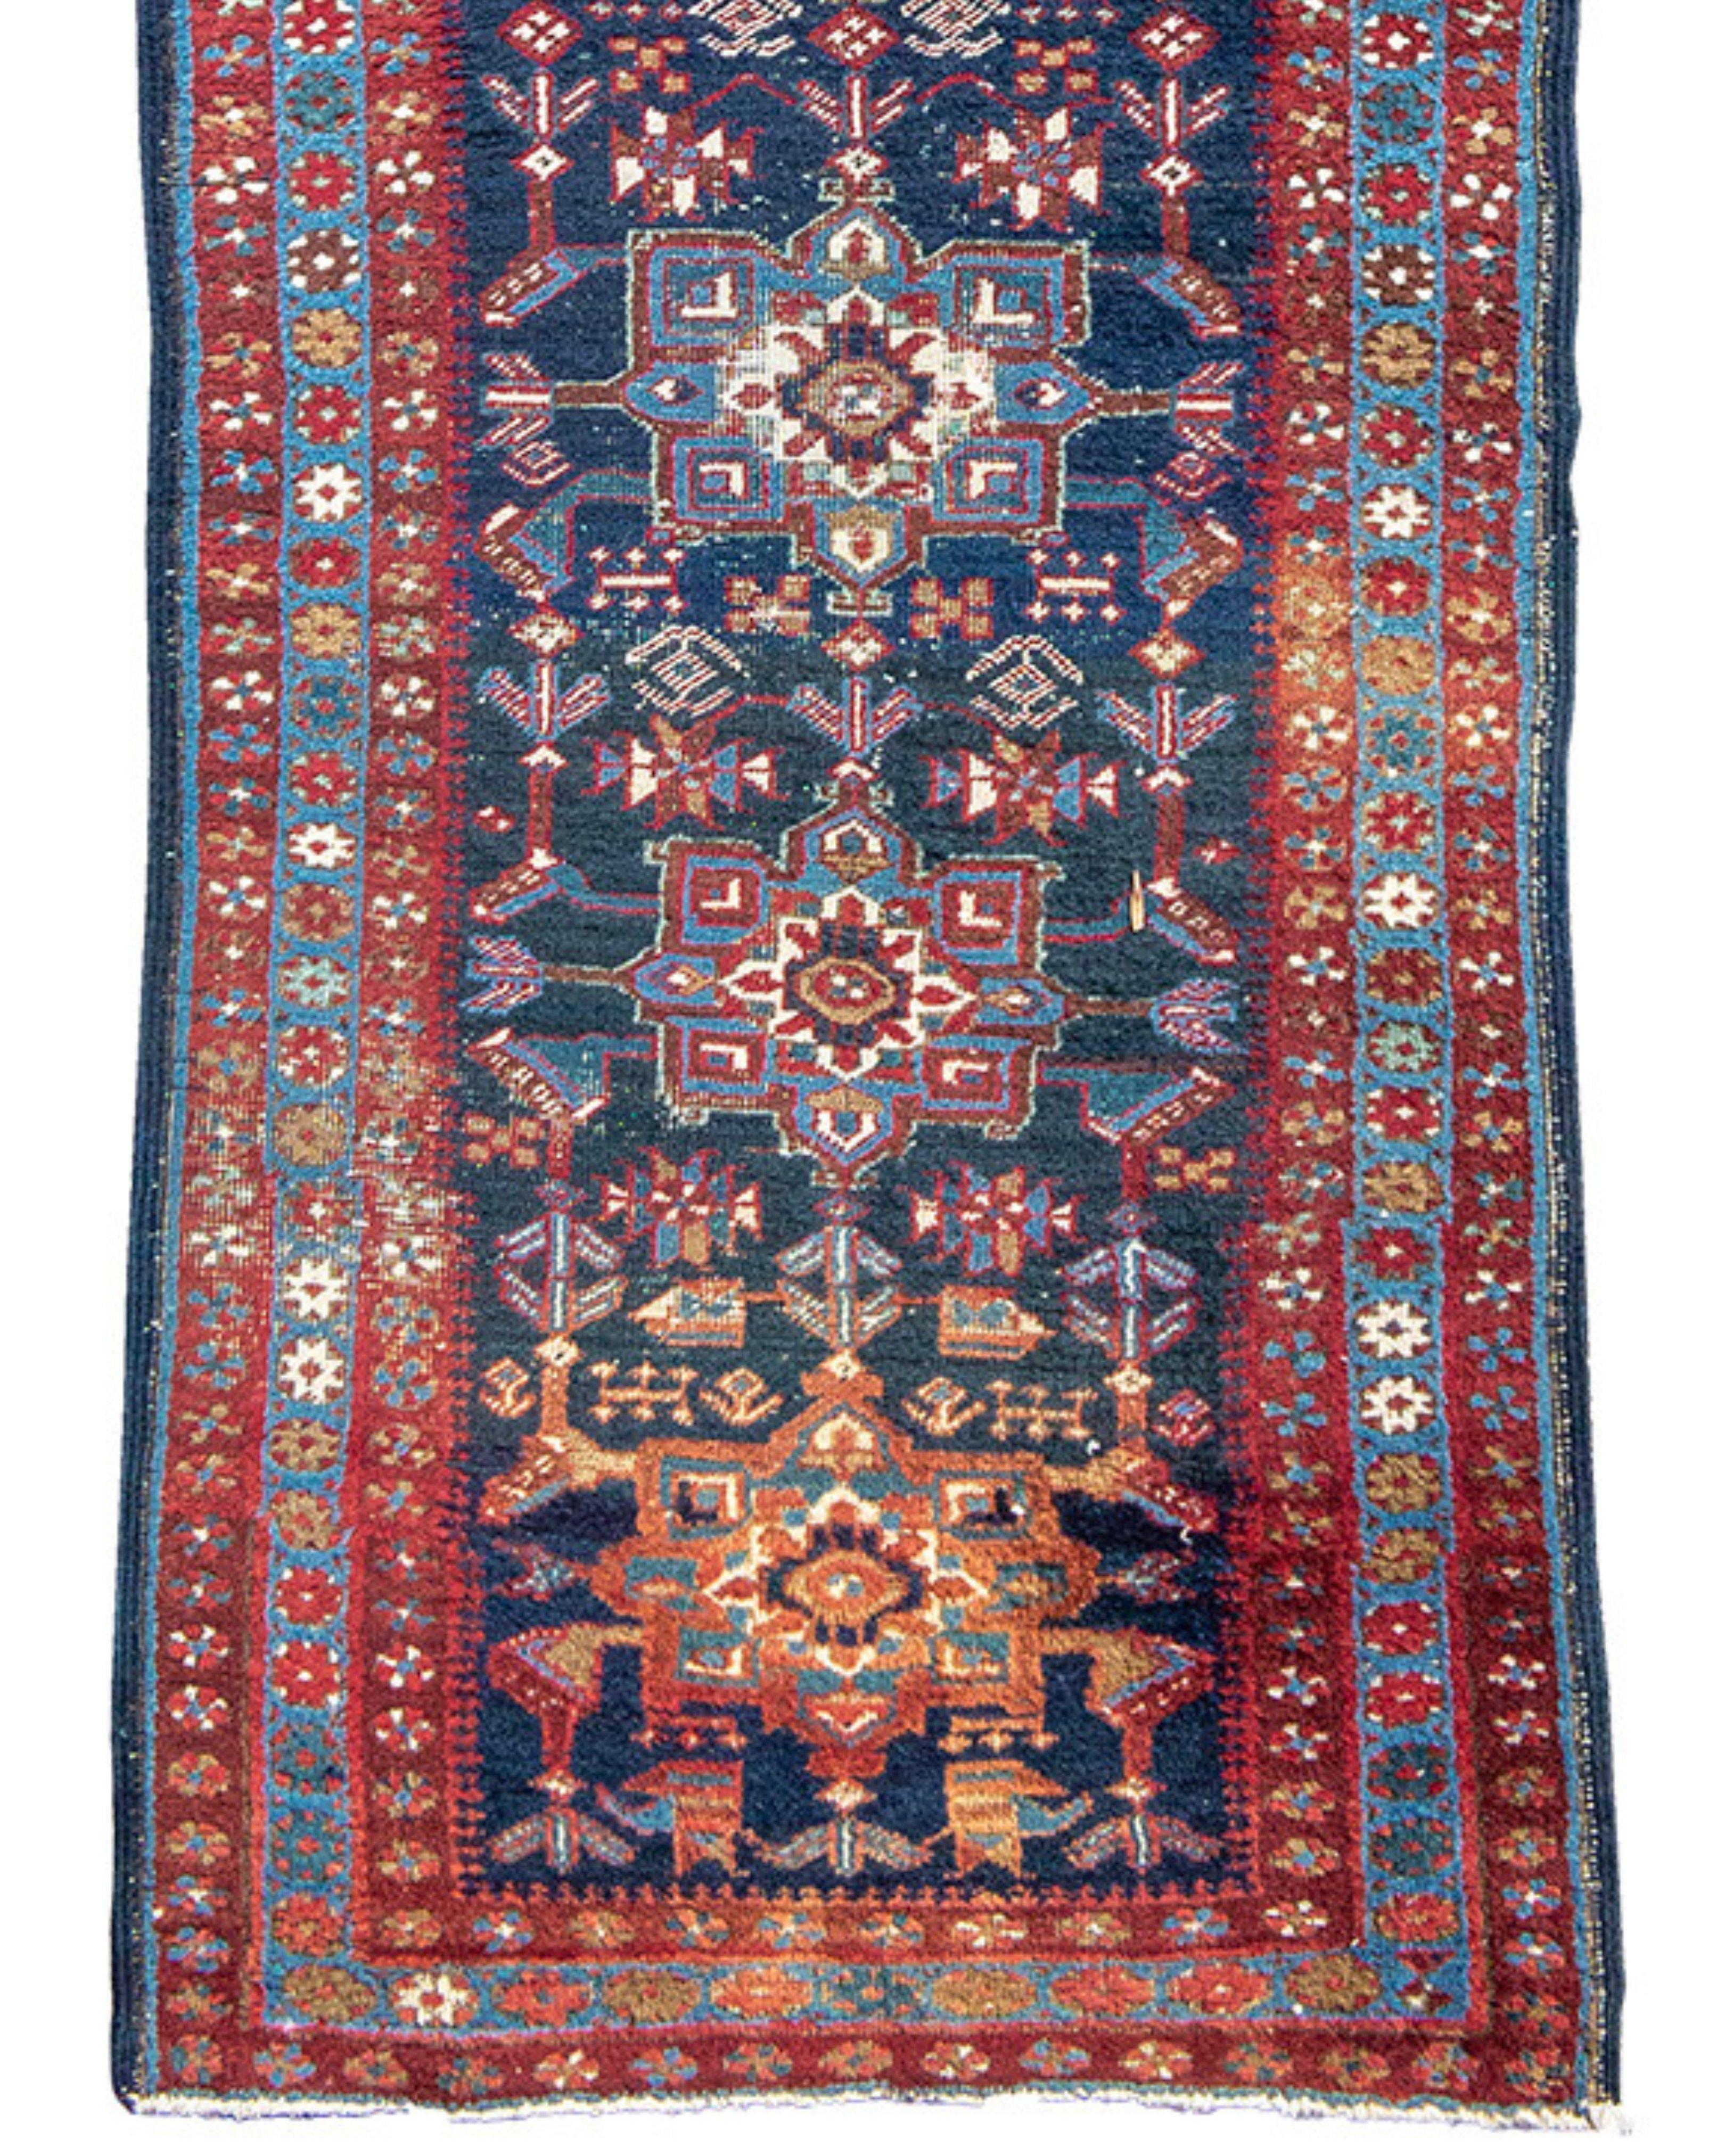 Wool Antique Persian Heriz Runner Rug, Early 20th Century For Sale